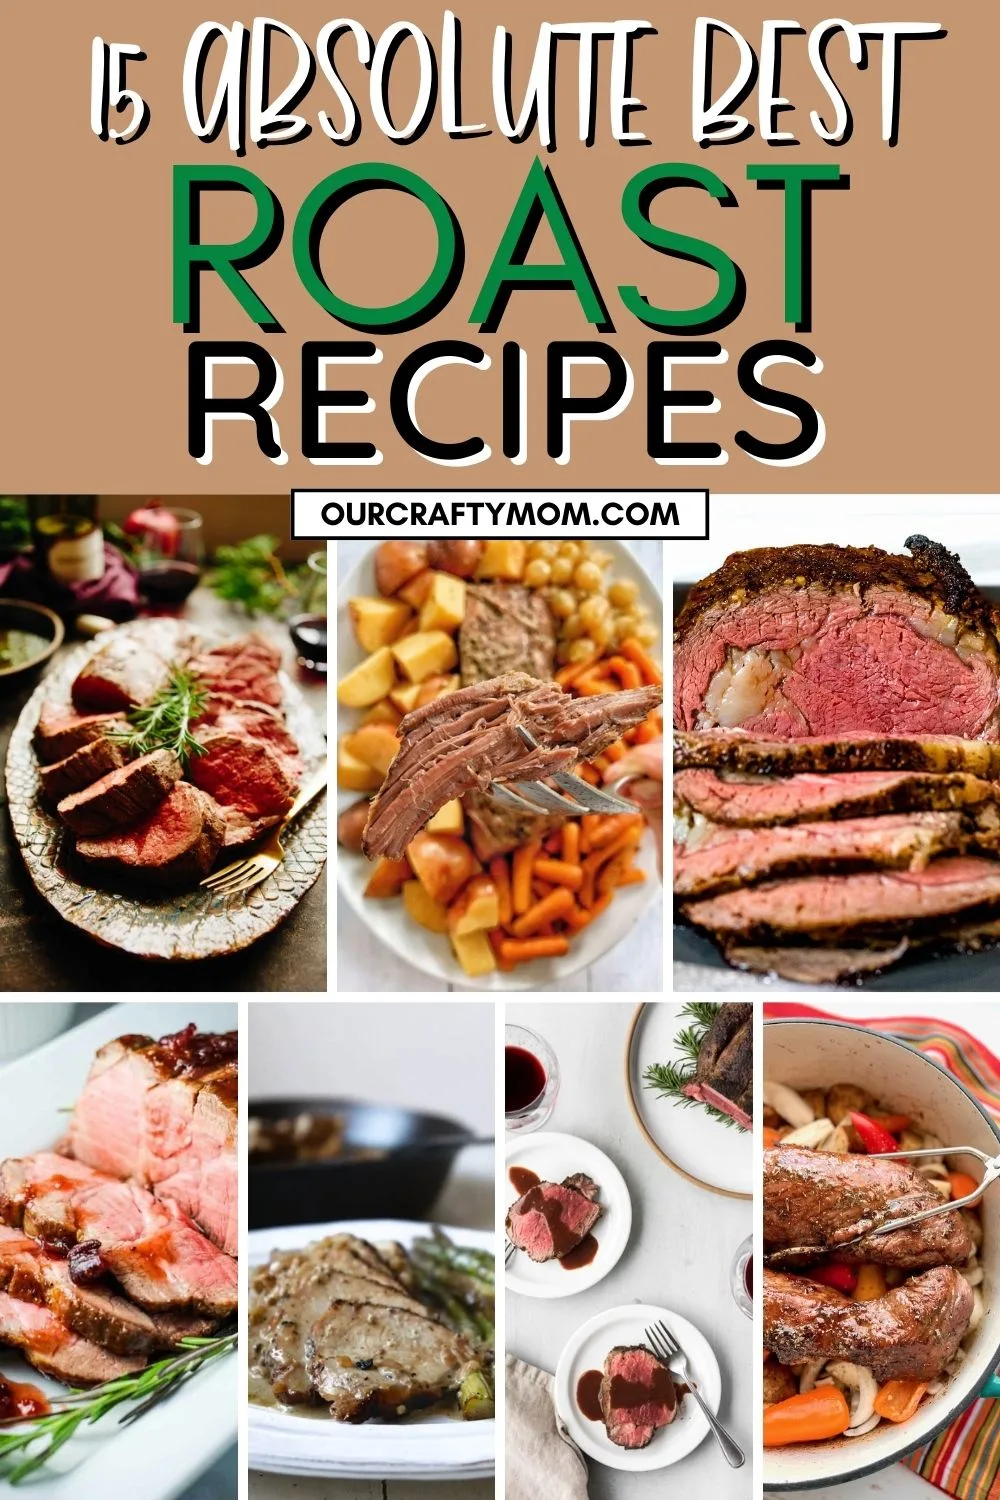 15 best roast recipes pin collage with text